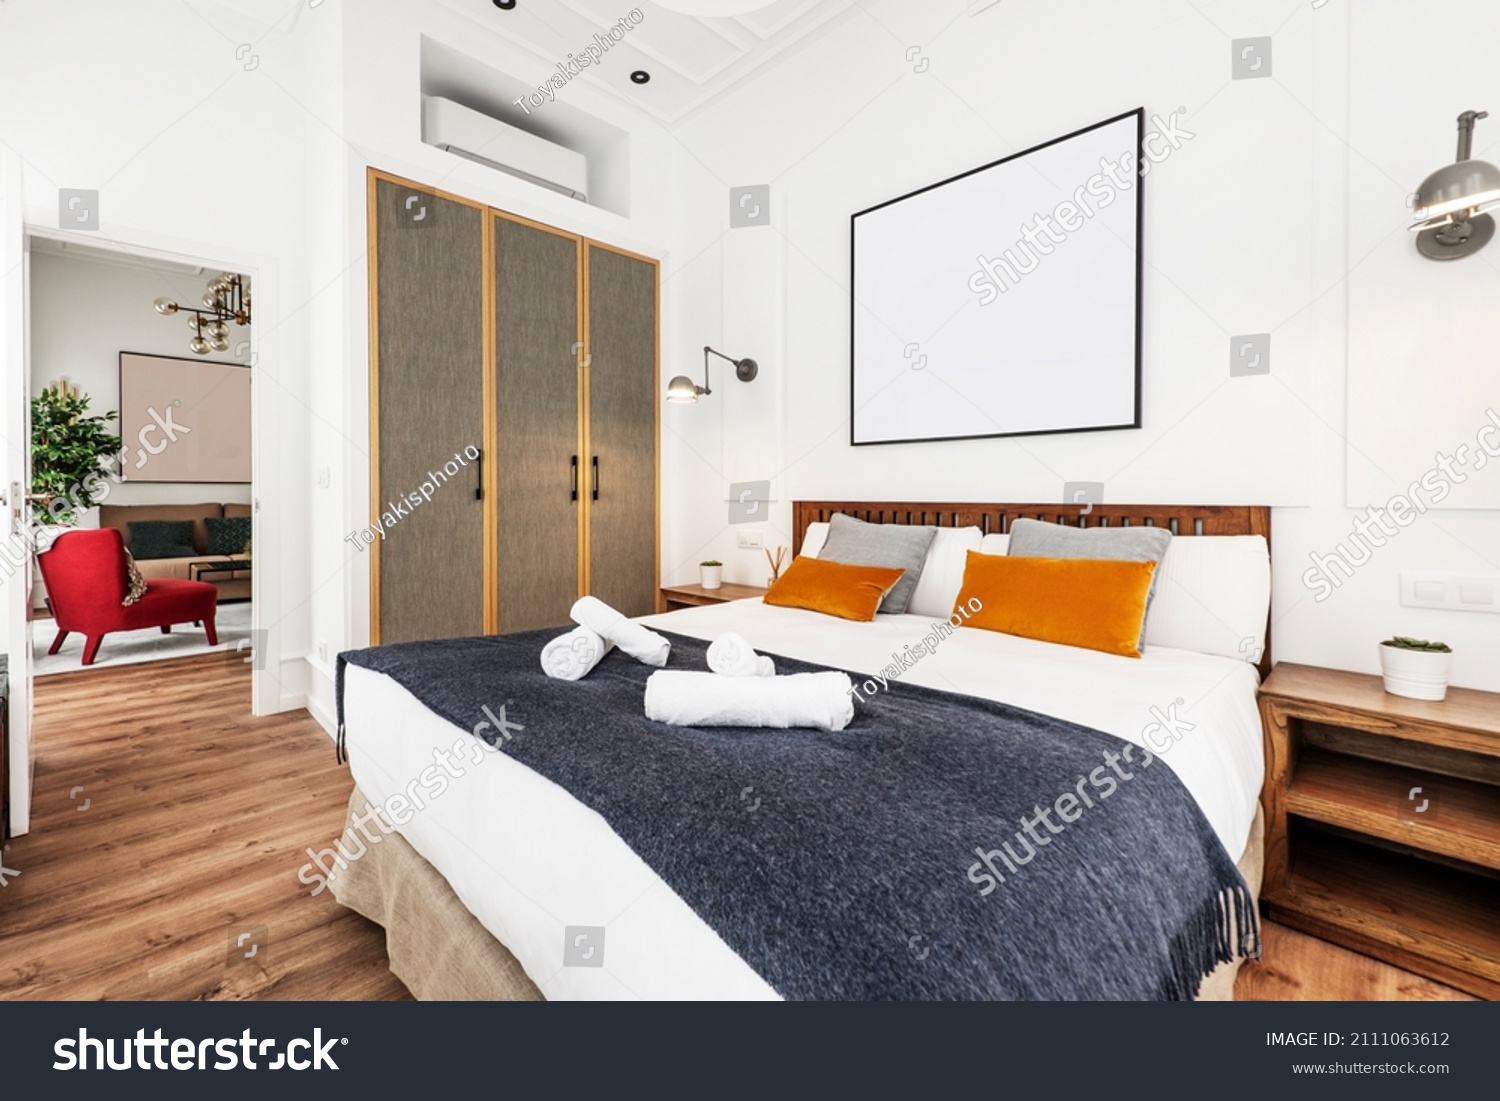 King-size bed in furnished short-term rental apartment with upholstered cupboard doors and decorative cushions #2111063612